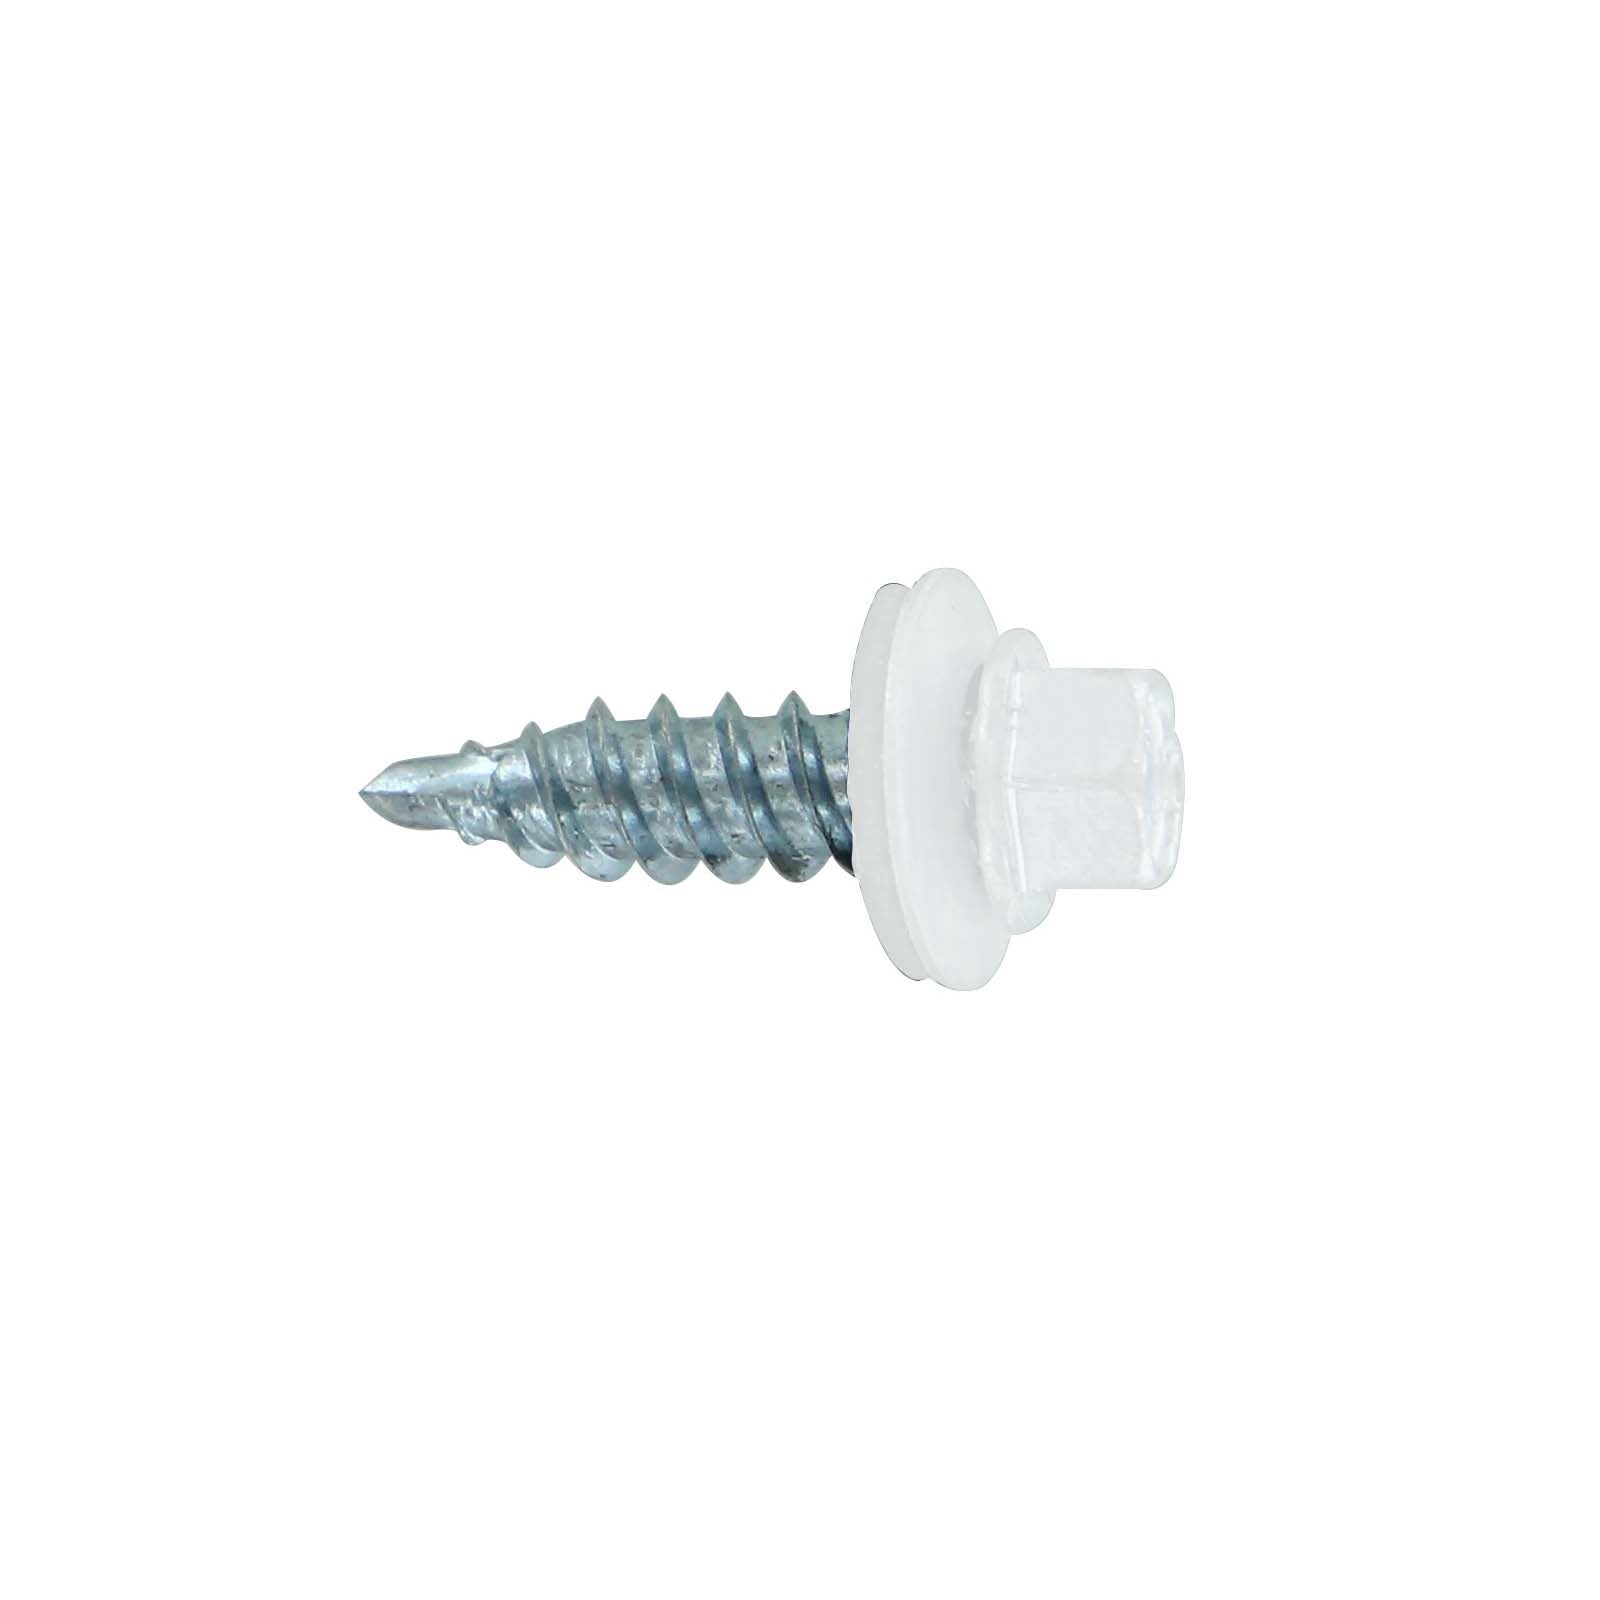 #12 x 34 inch Kwikseal Woodbinder Metal Roofing Stitch Screw Bright White Pkg 250 image 1 of 2